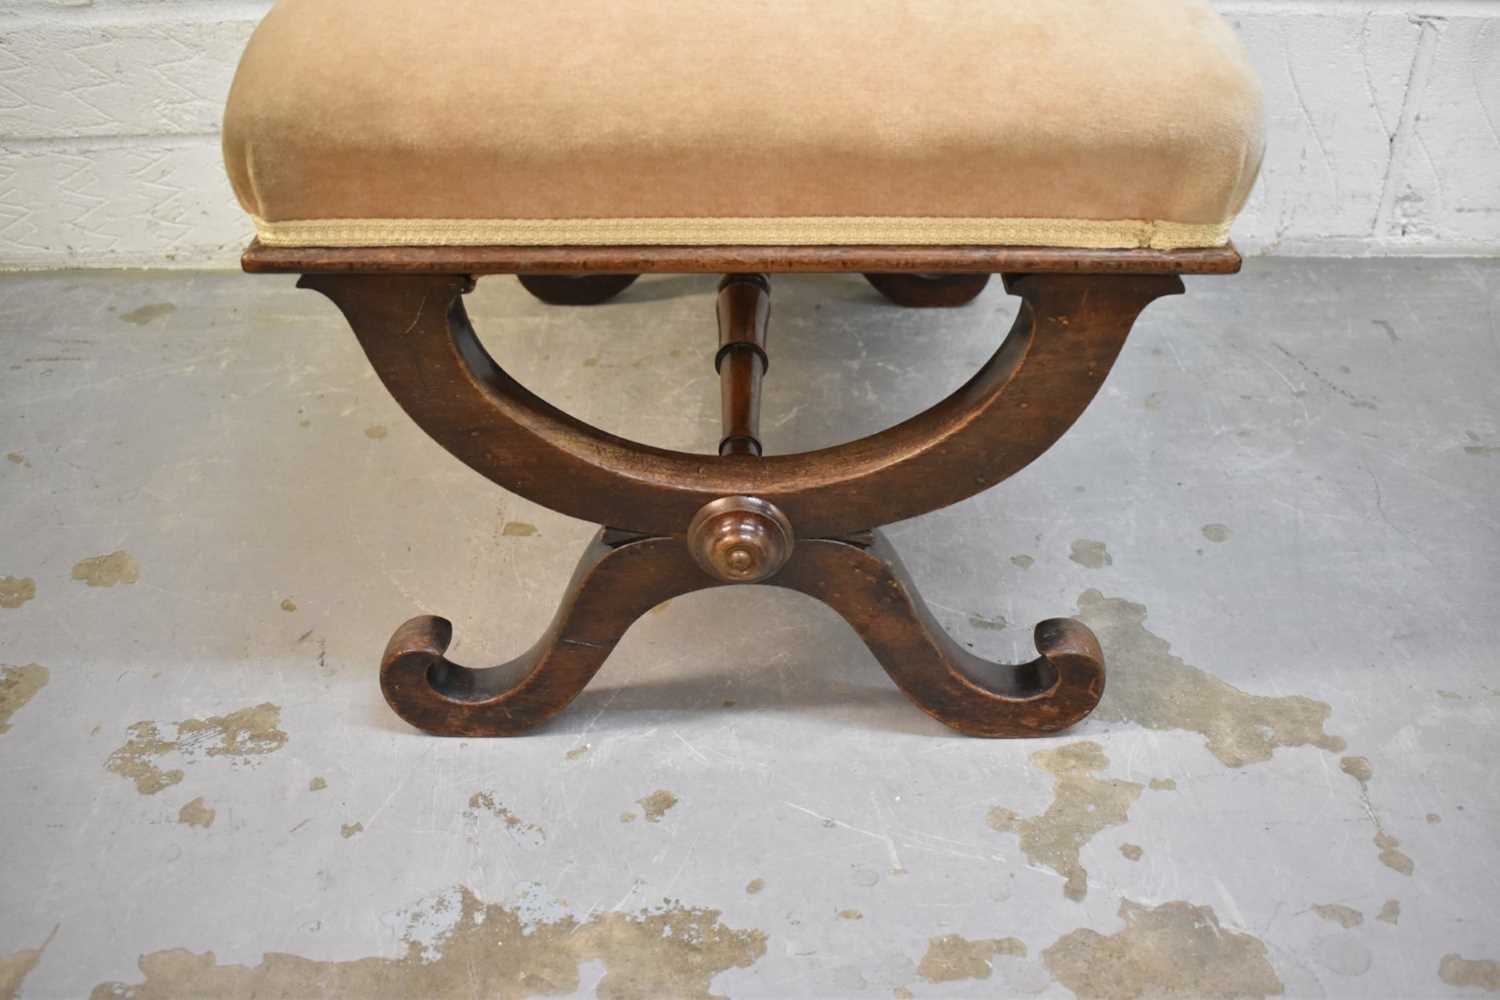 Early 19th century X-frame stool with removable seat - Image 3 of 5